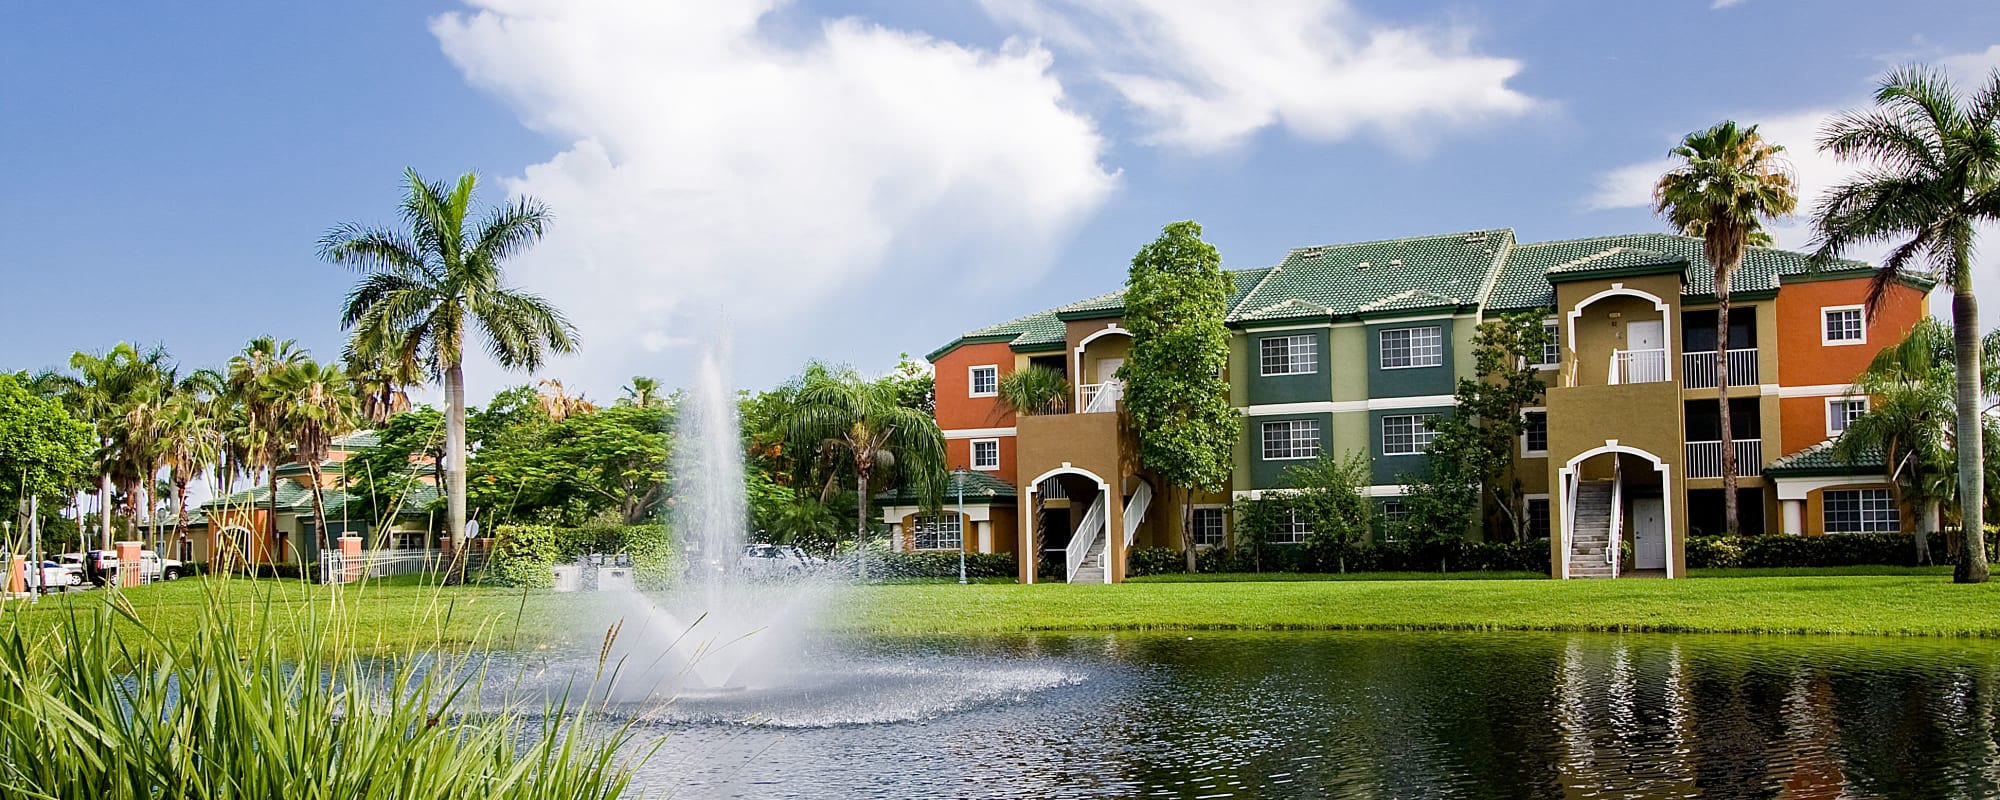 Amenities at Weston Place Apartments in Weston, Florida